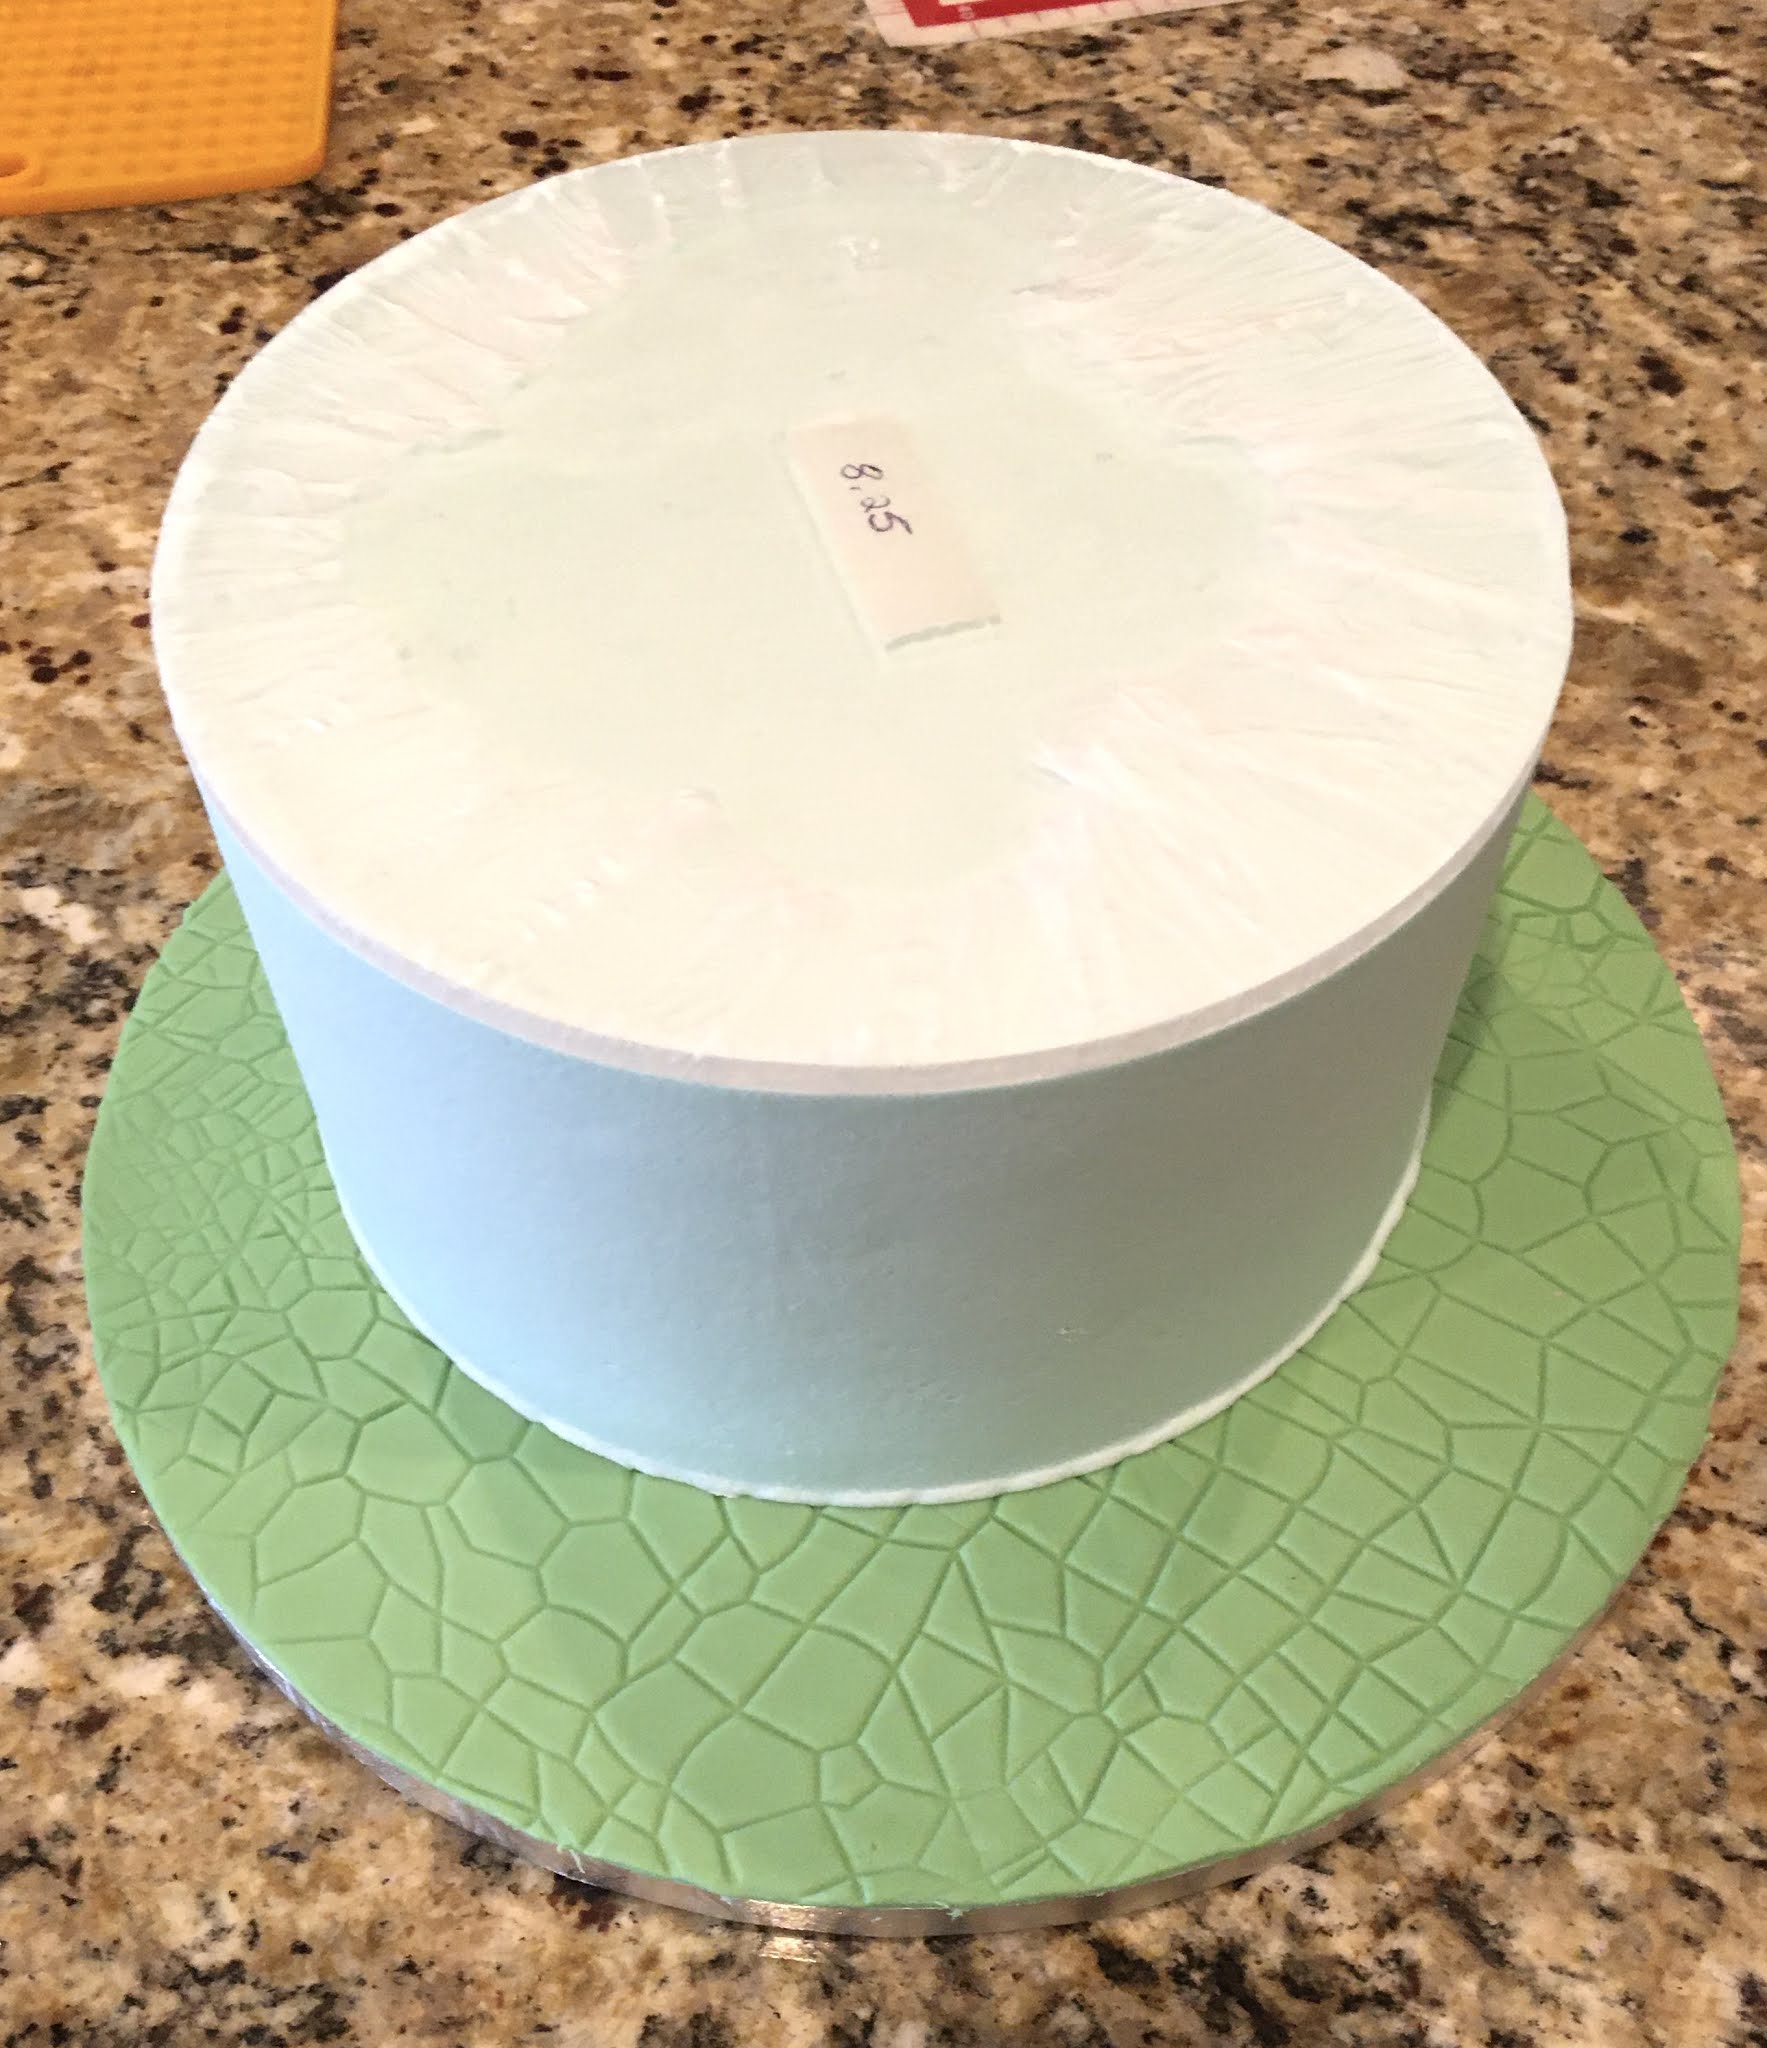 How To Use CakeSafe's Acrylic Disks for Smooth Buttercream or